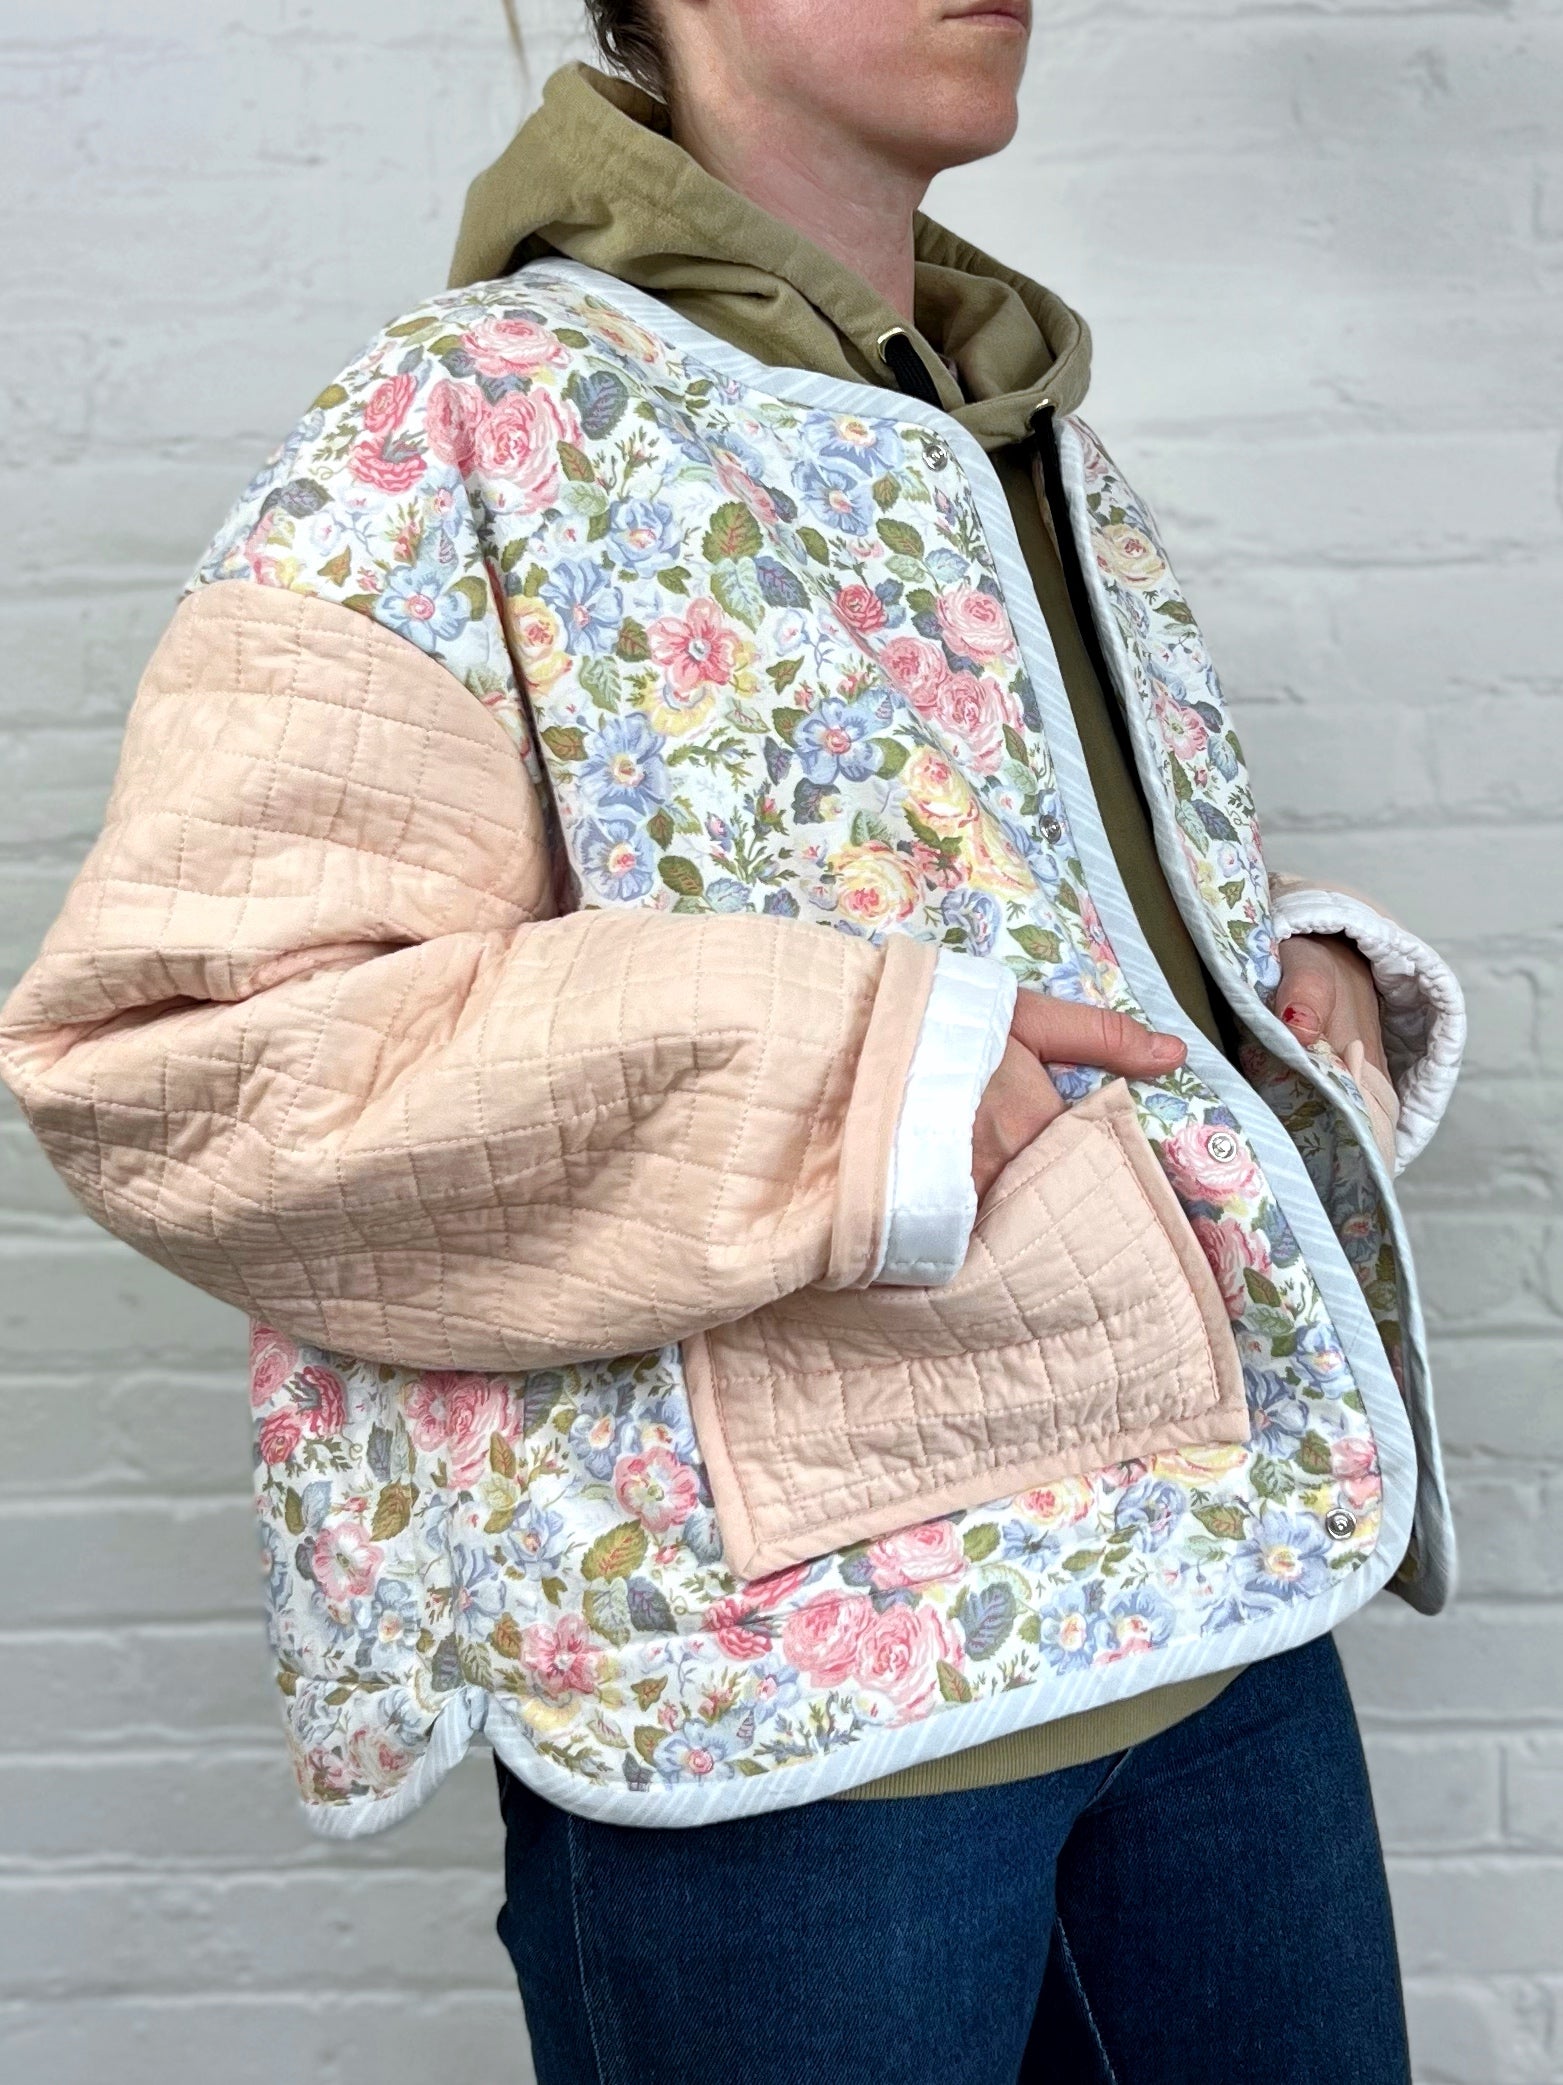 Upcycled quilted bomber jacket